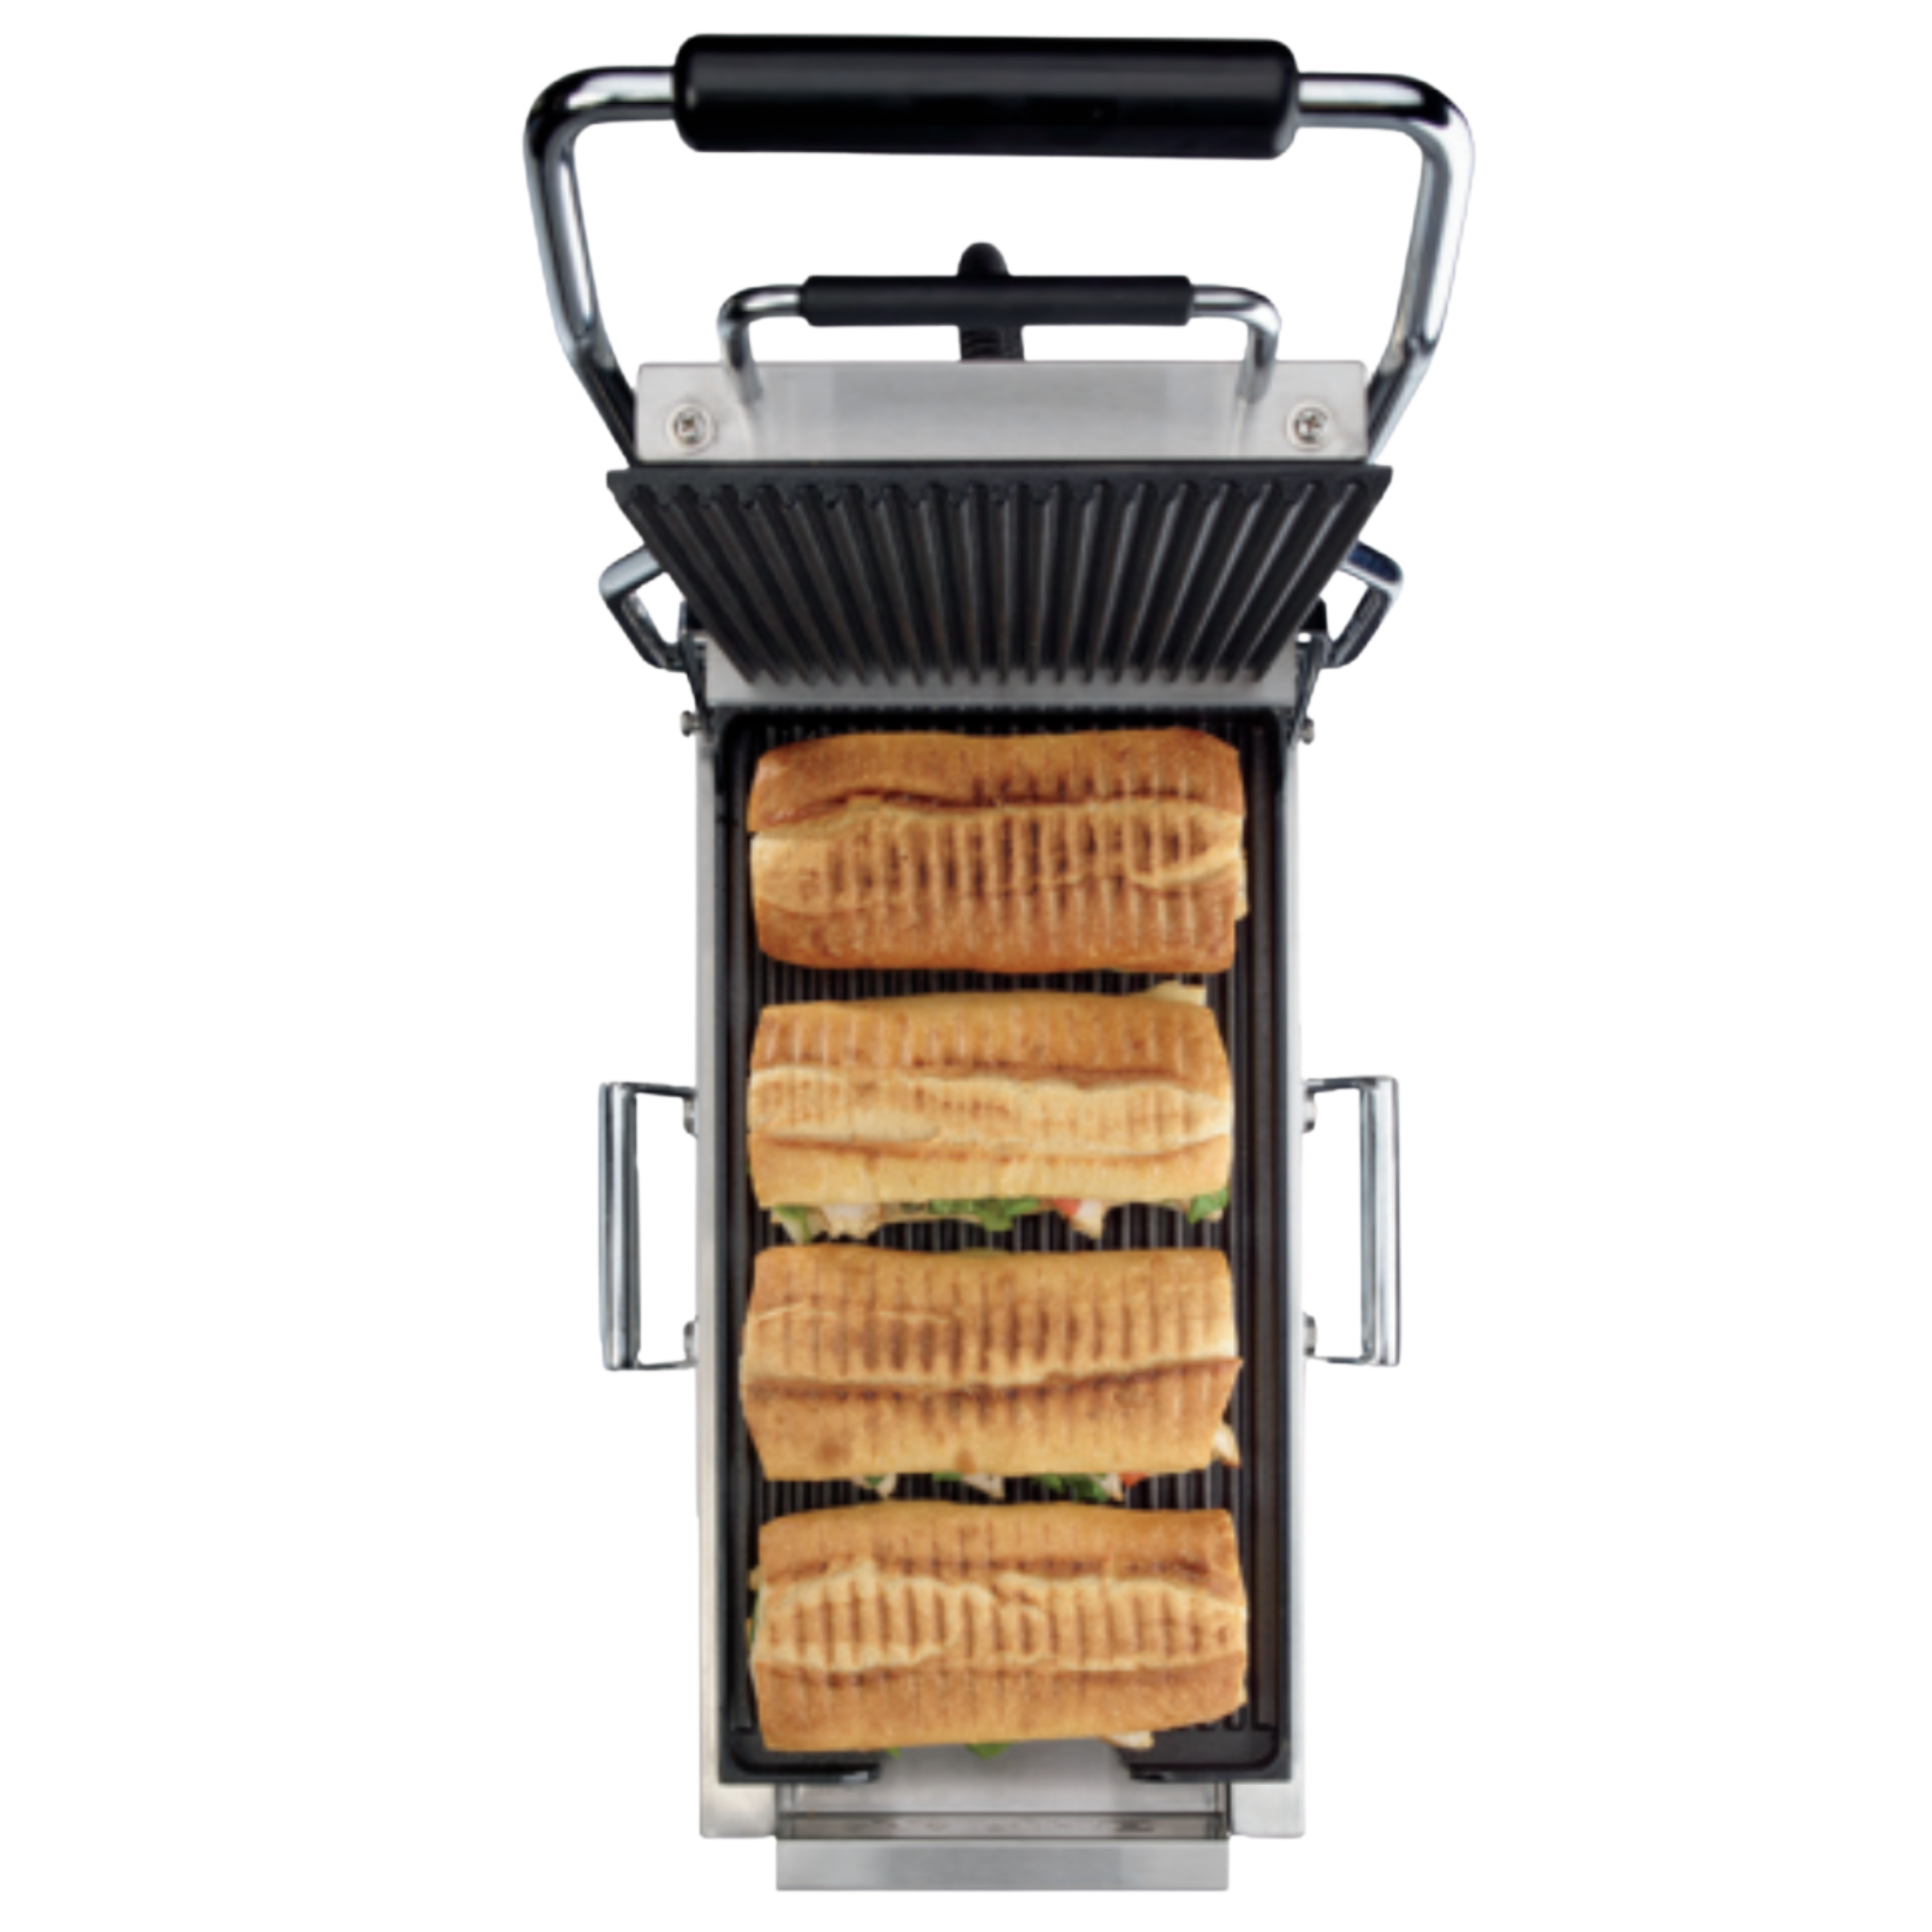 WPG200 Panini Compresso - Slimline Panini Grill by Waring Commercial